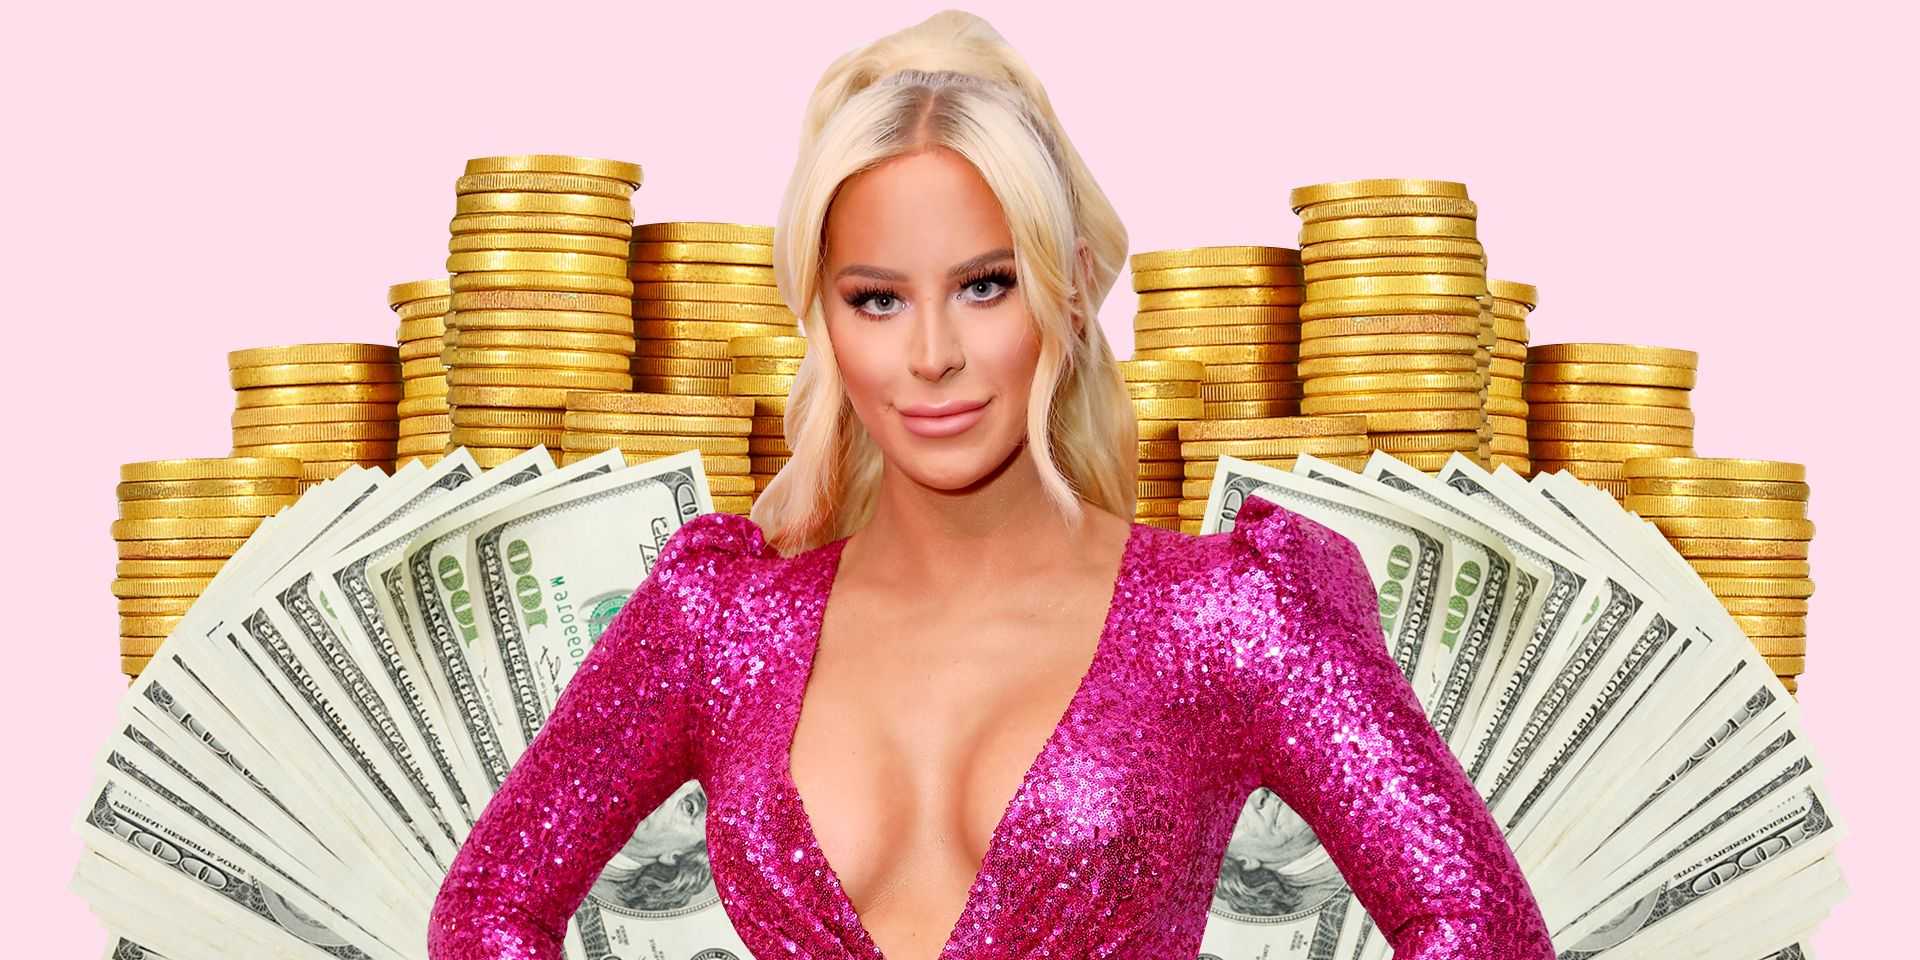 51 Hottest Gigi Gorgeous Big Butt Pictures Demonstrate That She Is As Hot As Anyone Might Imagine 773